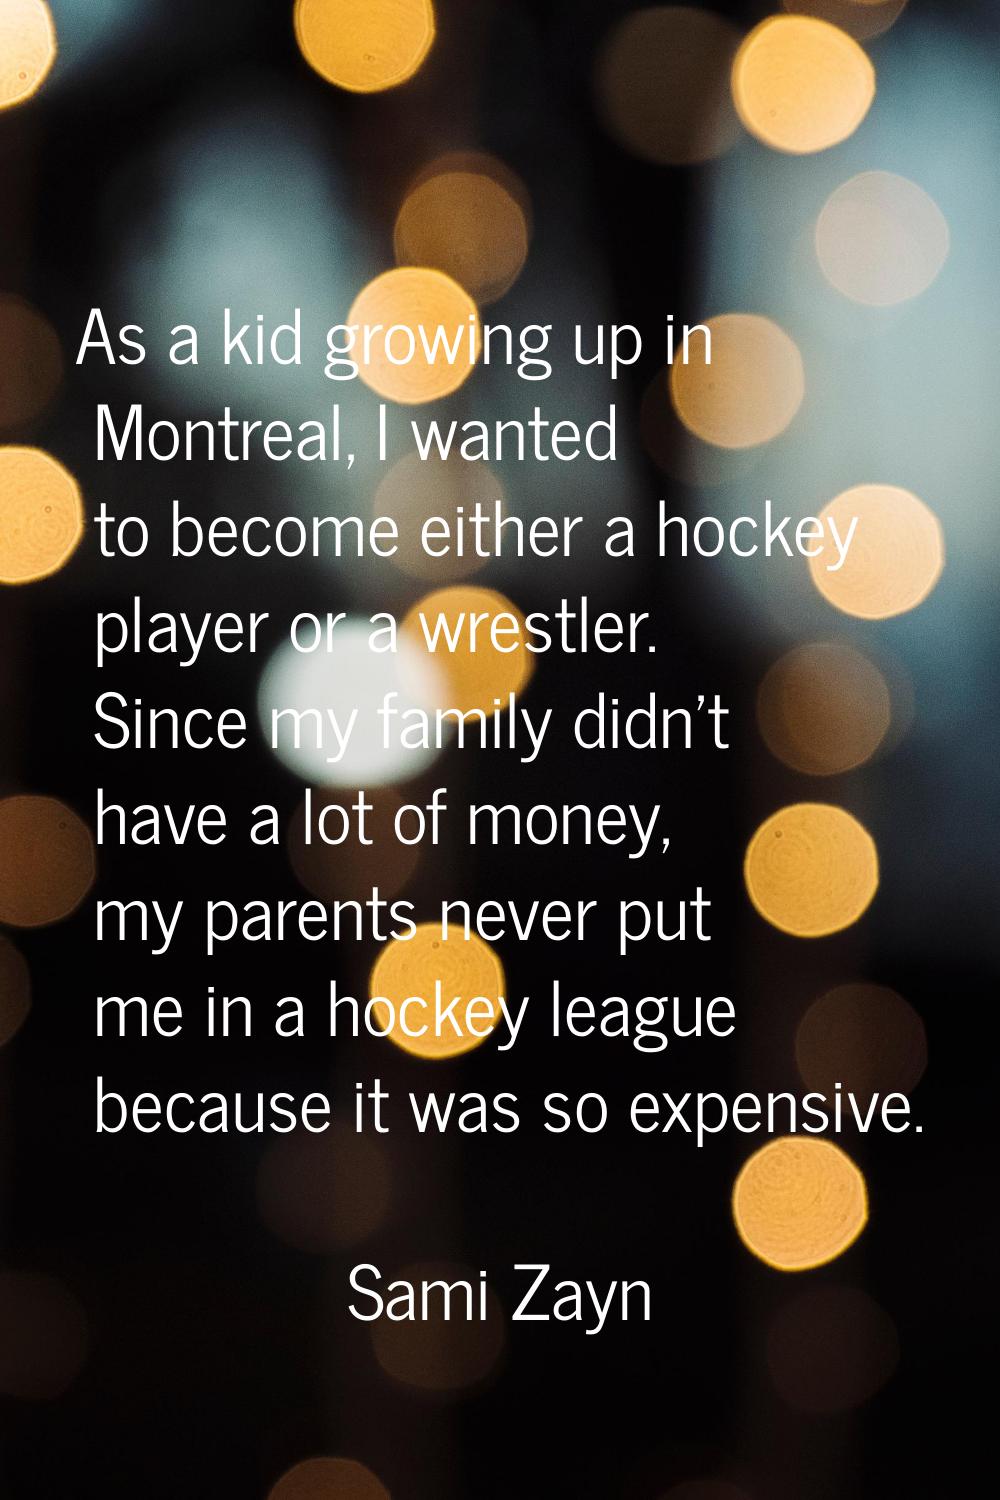 As a kid growing up in Montreal, I wanted to become either a hockey player or a wrestler. Since my 